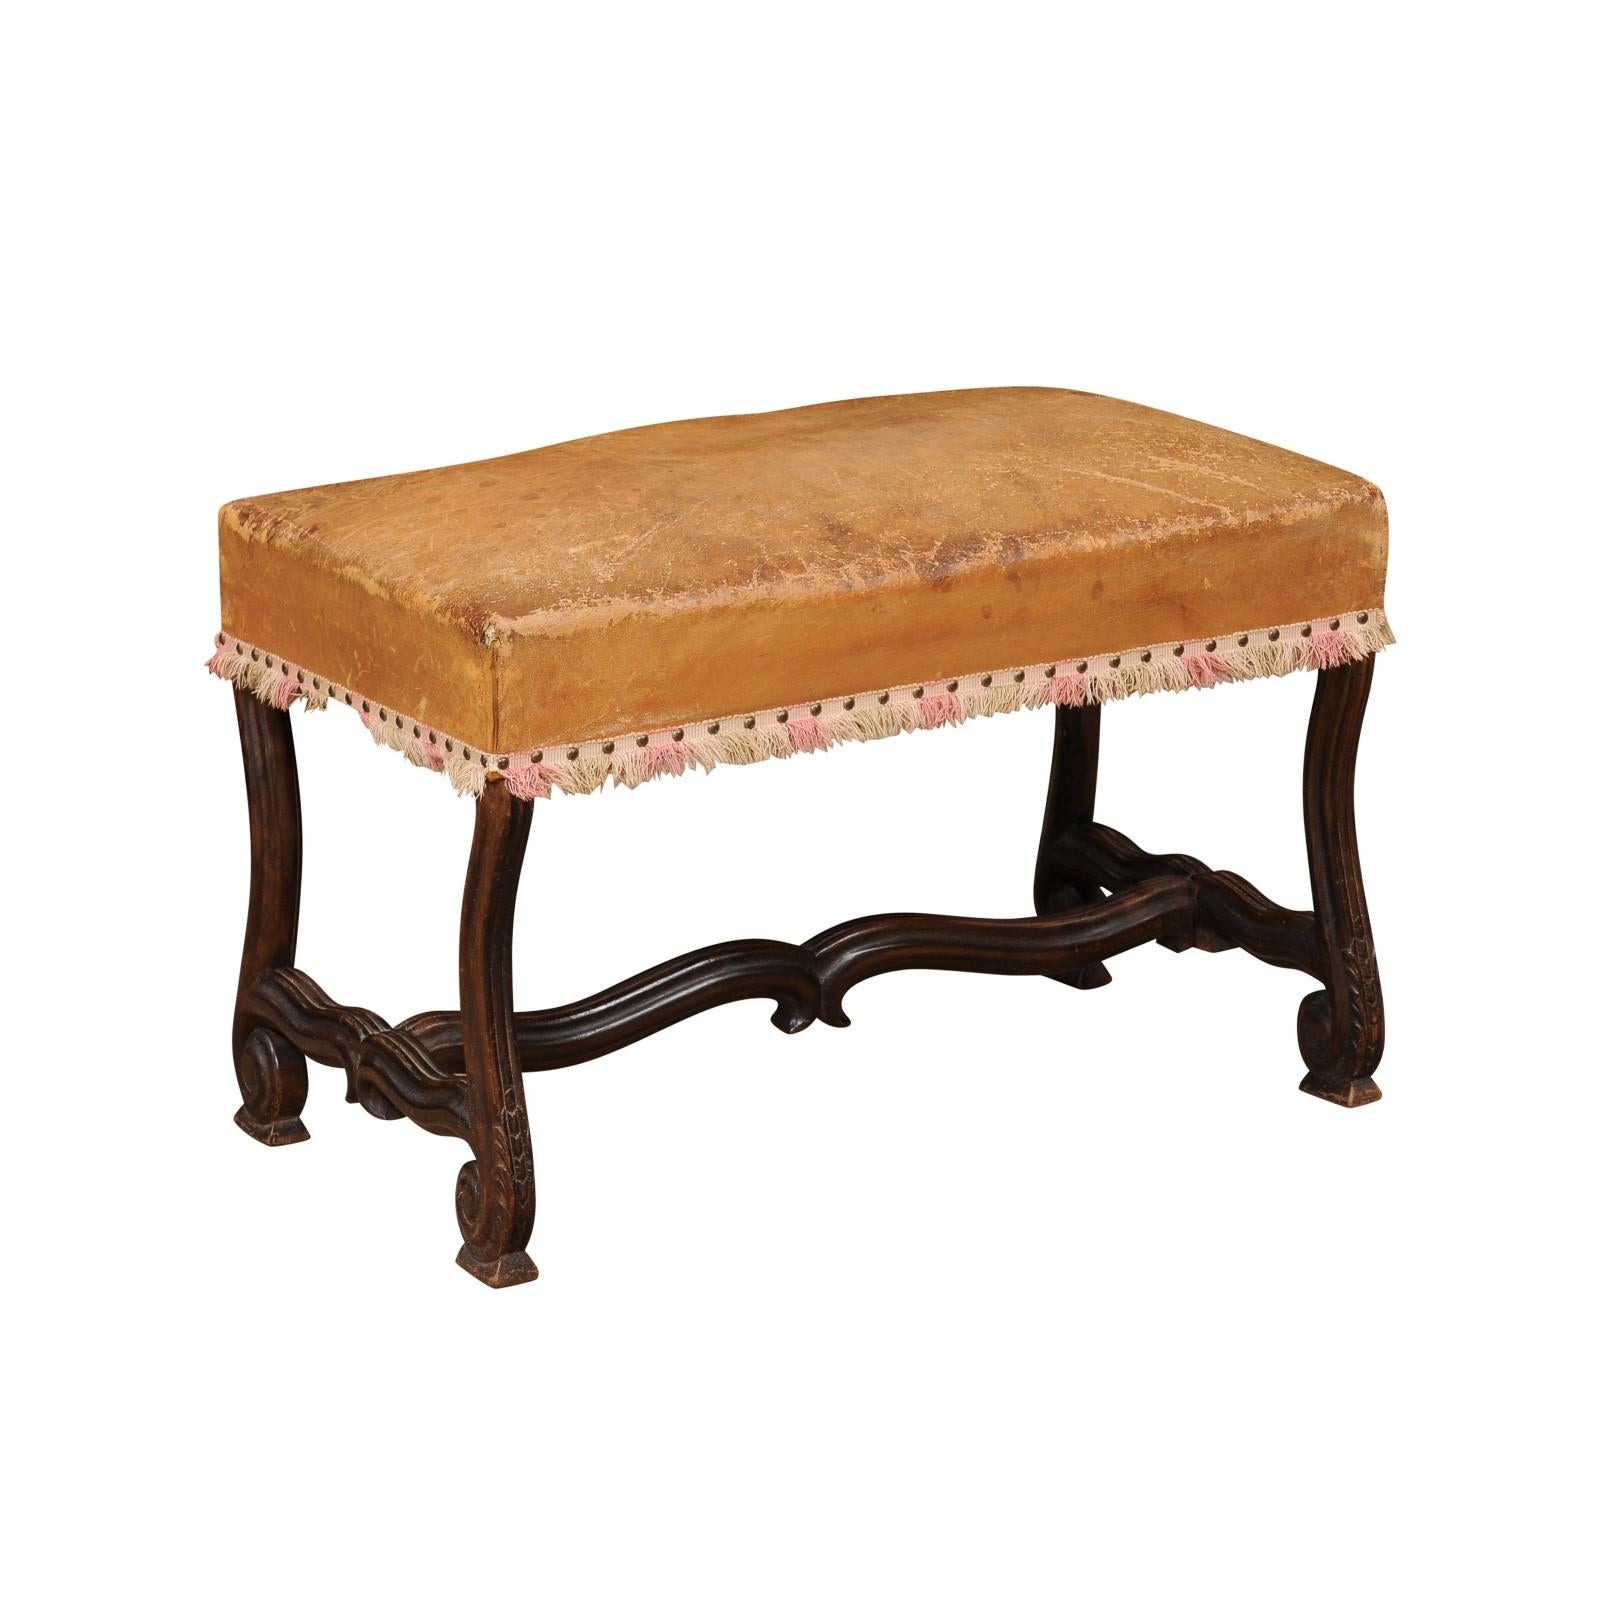 French Louis XIV Style Mutton Bone Bench with Tan Leather Top & Stretcher, 19th Century